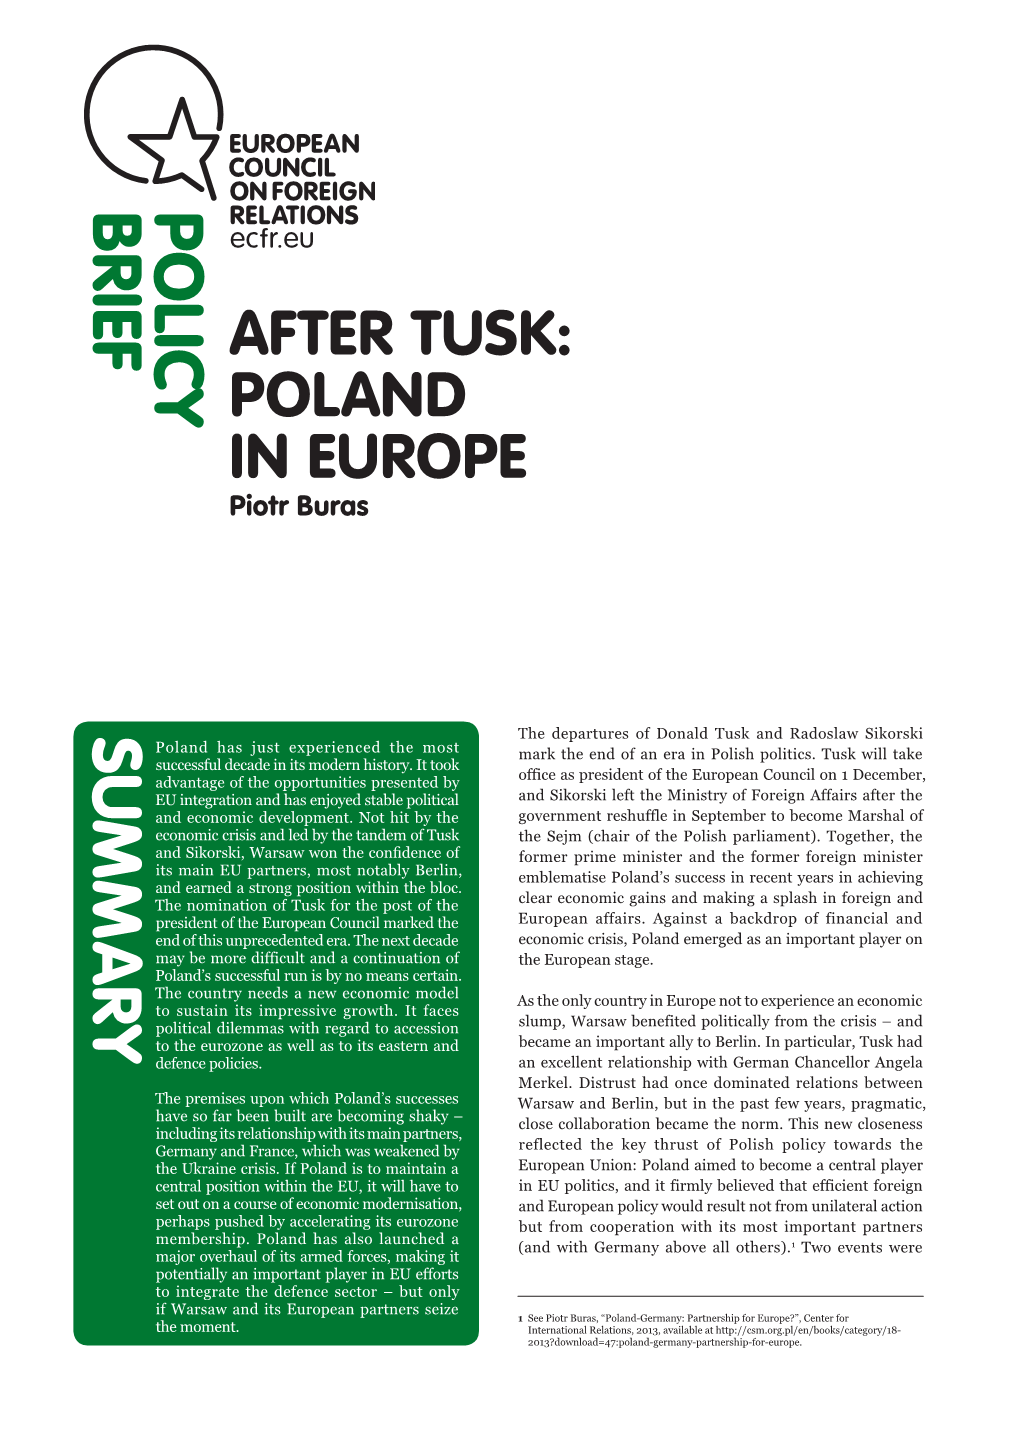 AFTER TUSK: POLAND in EUROPE Piotr Buras